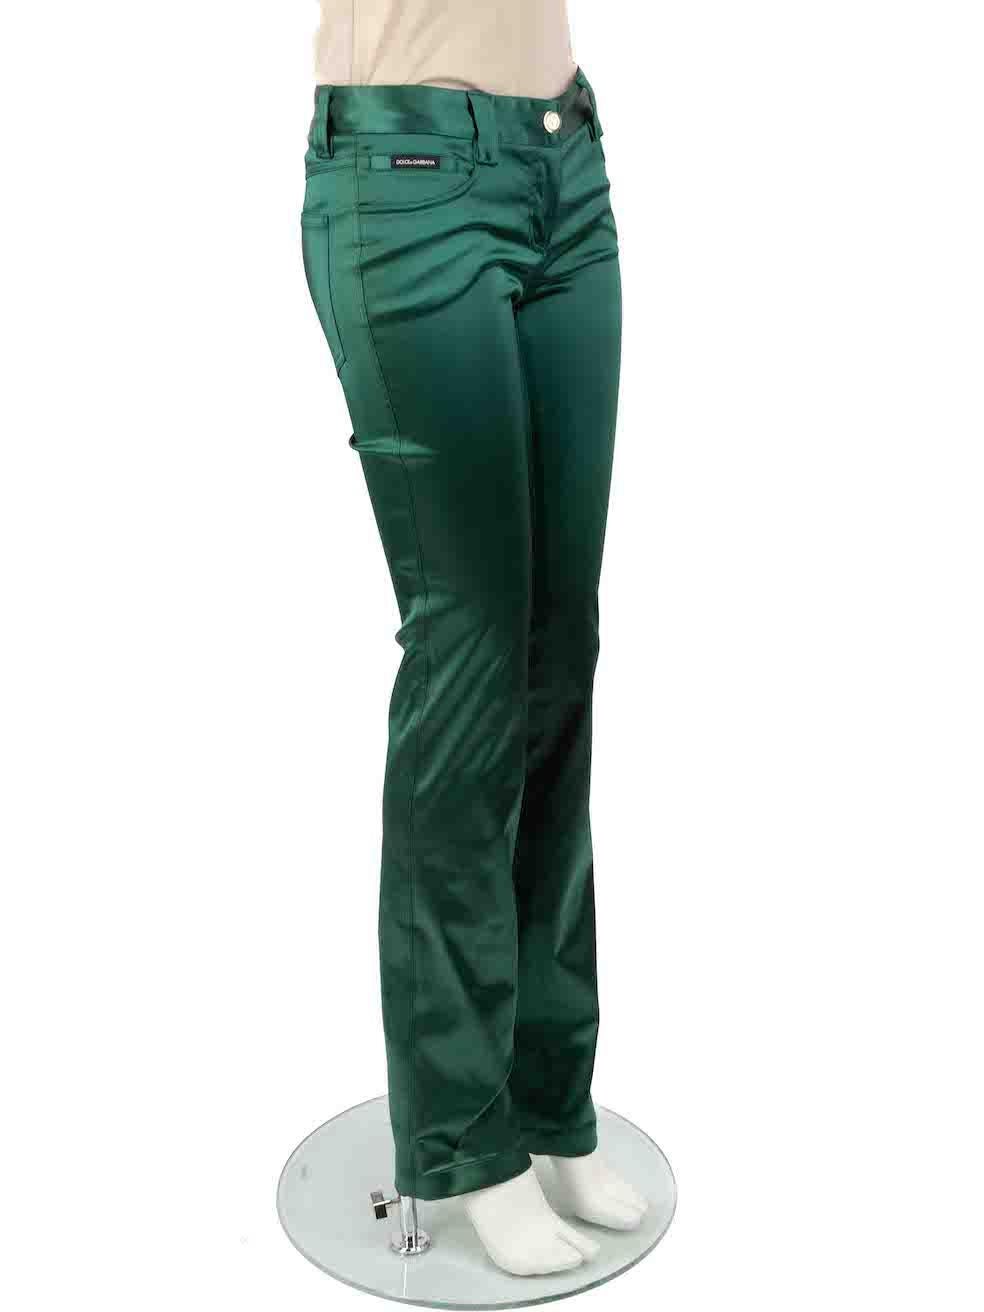 CONDITION is Very good. Minimal wear to trousers is evident. Minimal wear to the front with plucks to the weave on this used Dolce & Gabbana designer resale item.
 
 Details
 Green
 Synthetic
 Trousers
 Slim fit
 Mid rise
 2x Front pockets
 2x Back